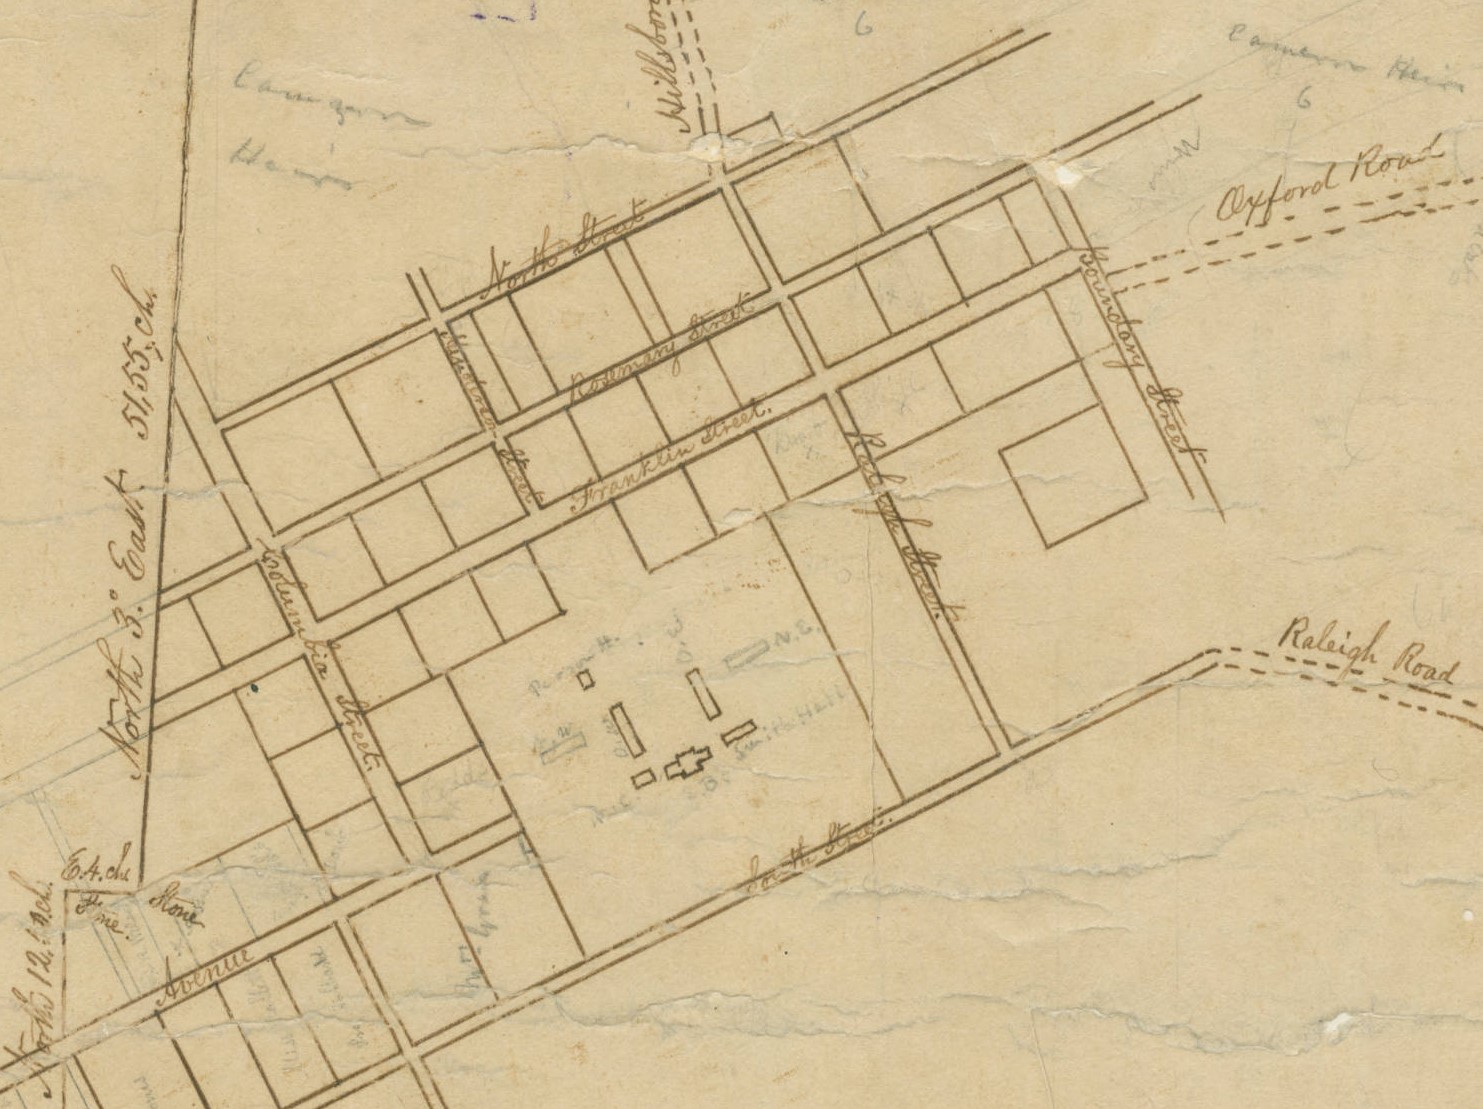 Hand-drawn map of Chapel Hill buildings and UNC depicts 1852 but was drawn in 1880.